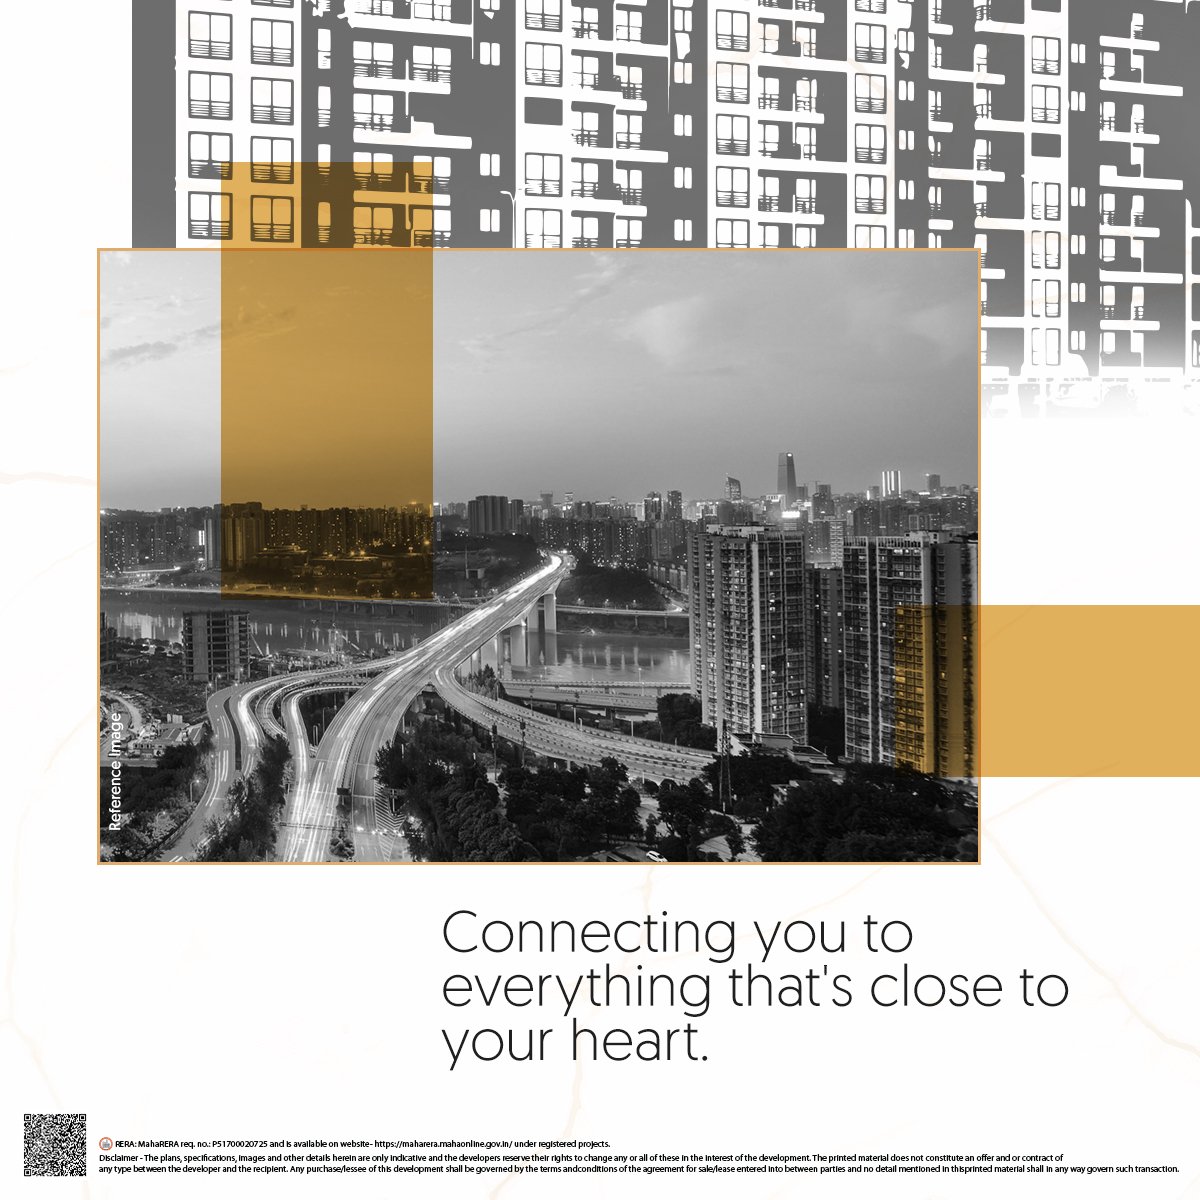 Live effortlessly at GuruAtman Residences, where every detail is designed to enhance your daily living experience.

#GurukrupaGroup #GuruAtman #Connectivity #ResonatesWithAspirations #IdealLivingSpace #SeamlessPath #DreamHome #Aspirations #SmoothConnectivity #Kalyan